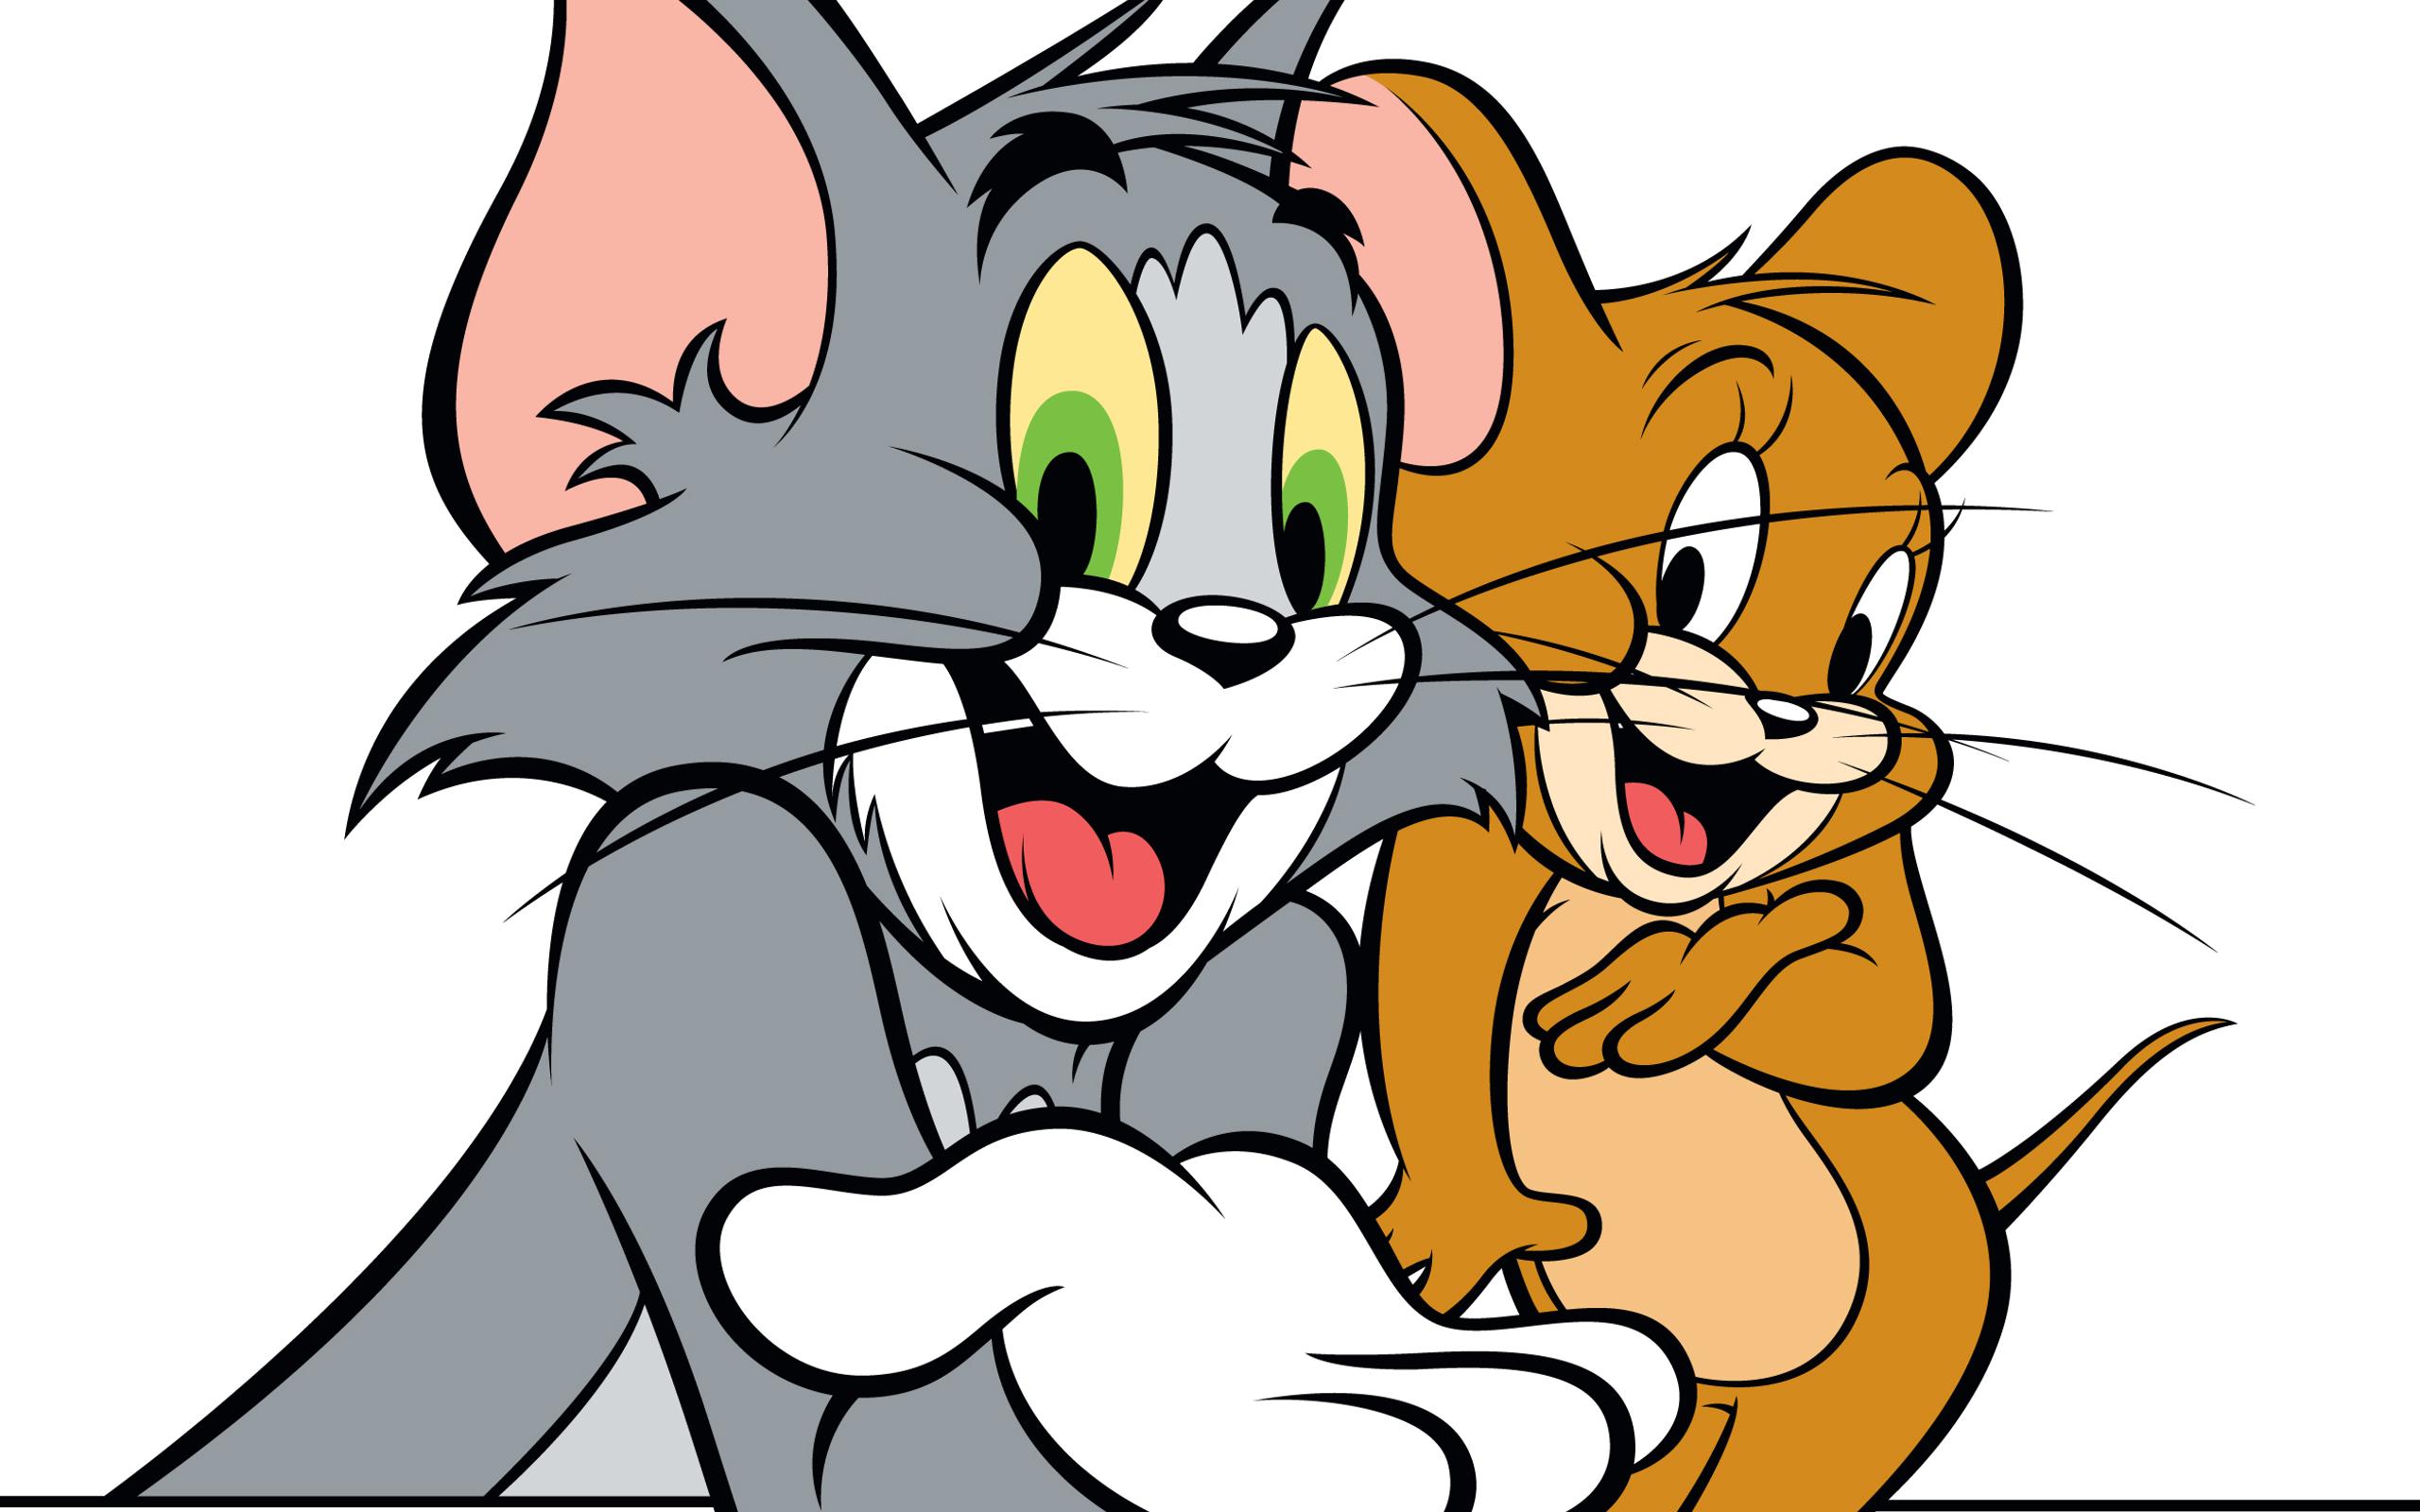 Download Tom and Jerry with smile on face - Happy moment 2560x1600.